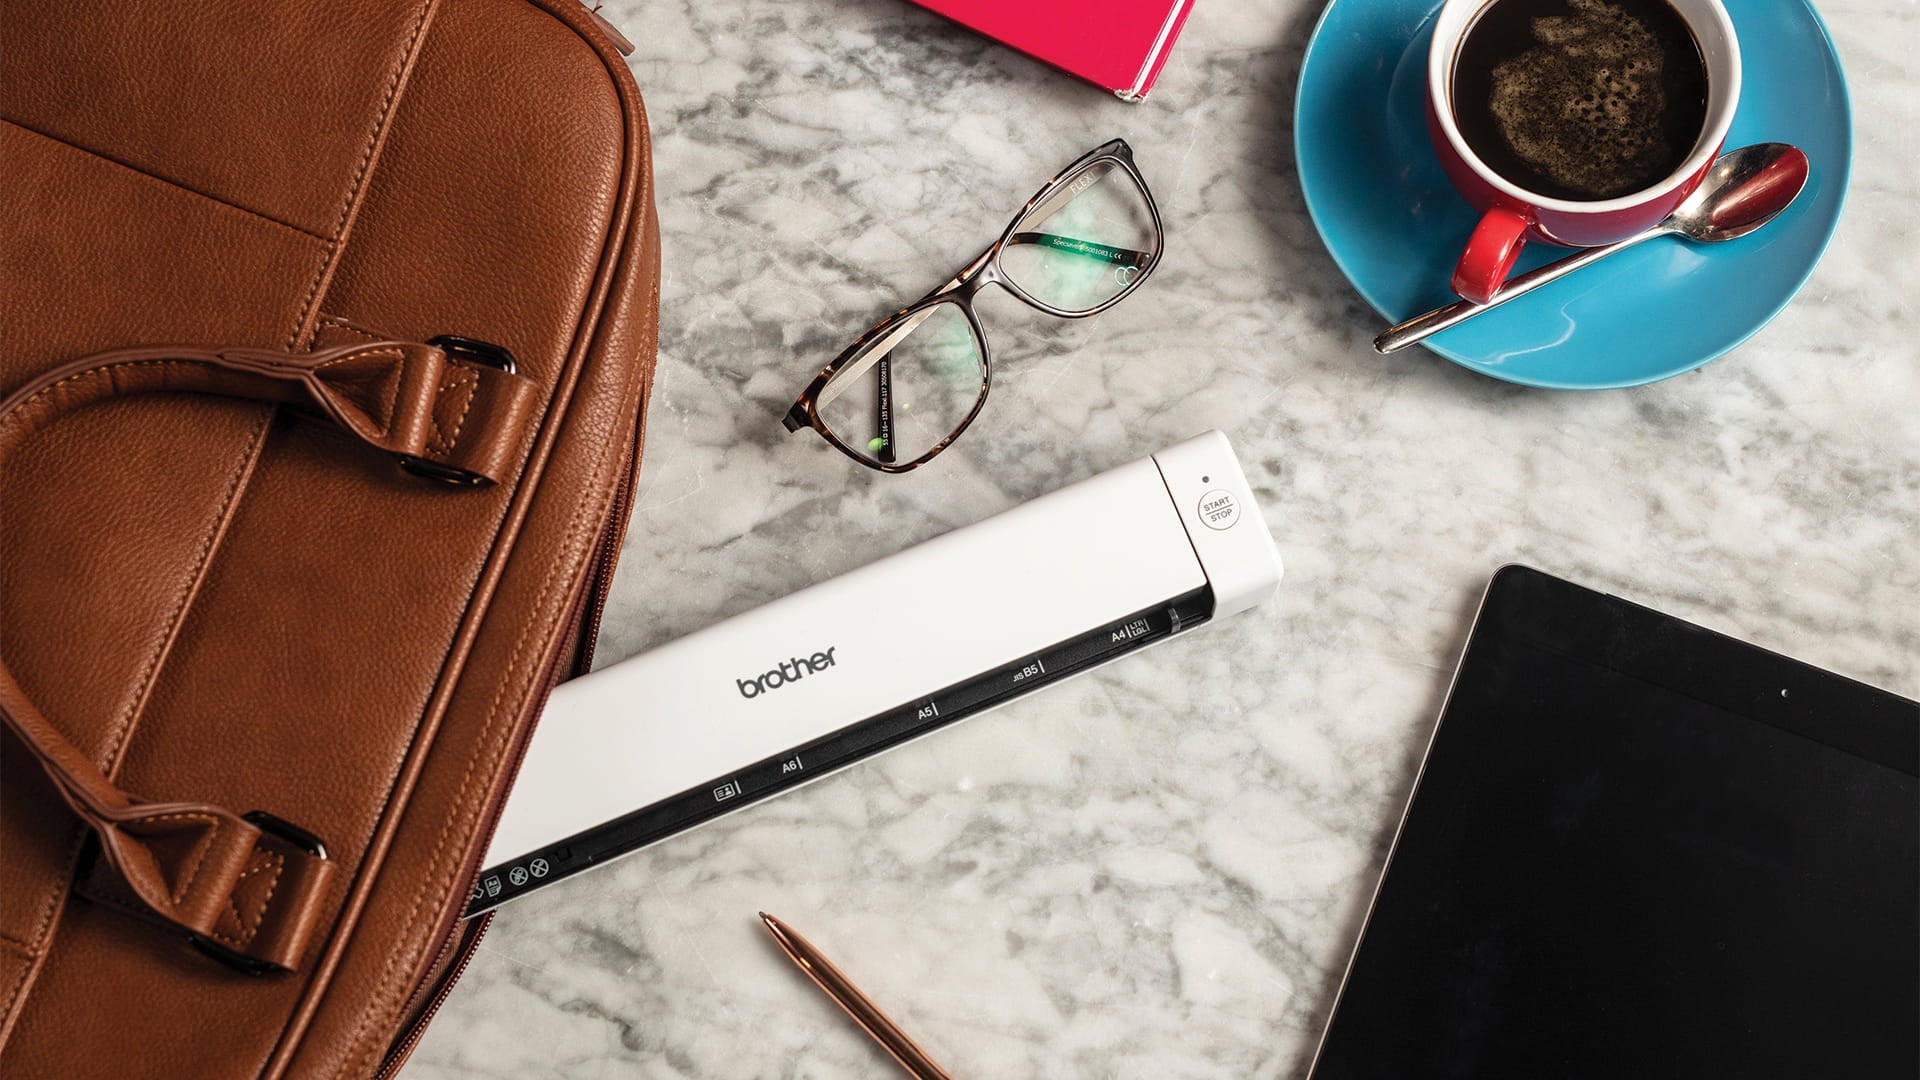 BROTHER DS640 PORTABLE DOCUMENT SCANNER